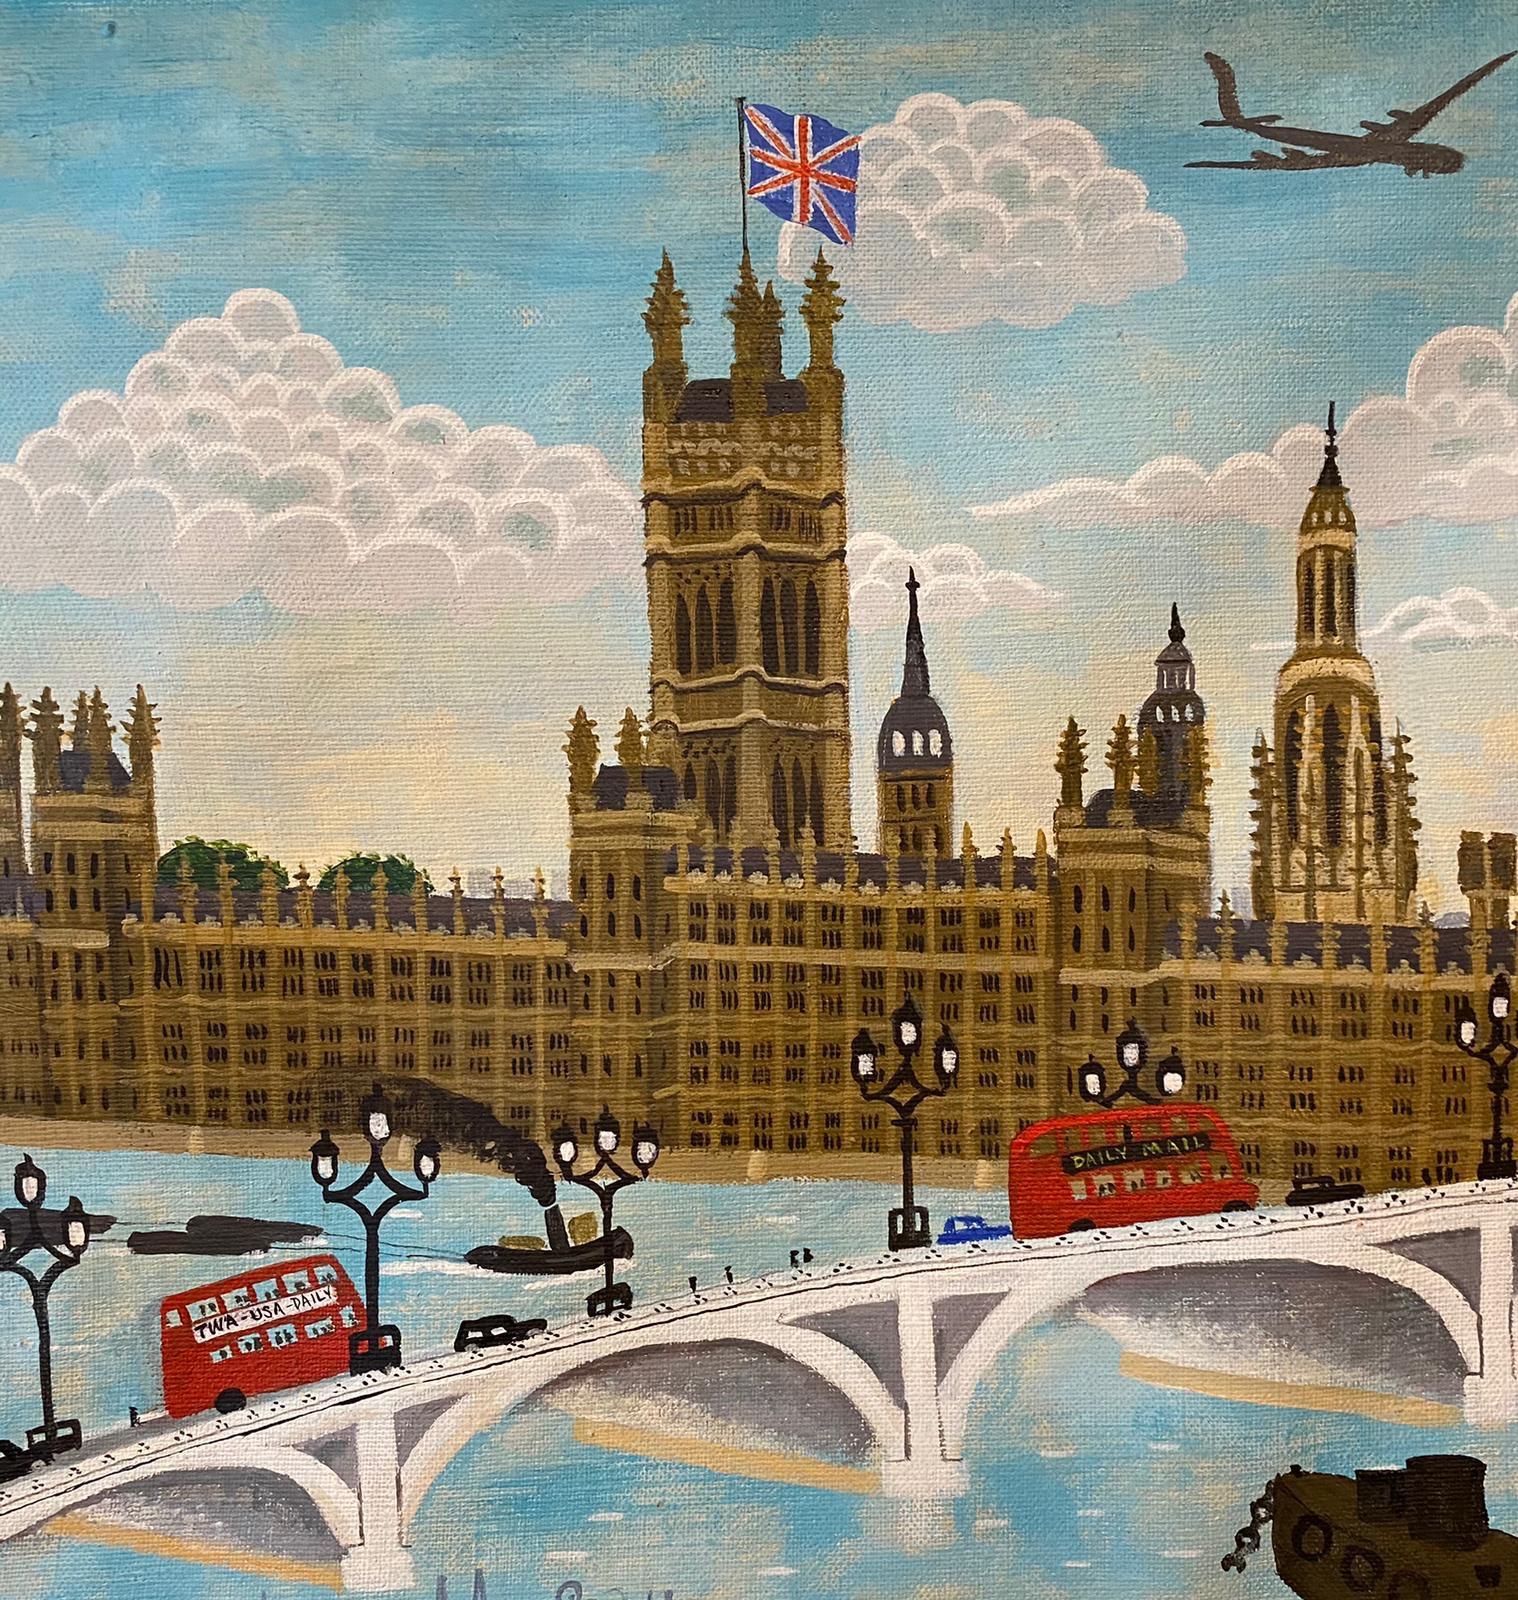 Big Ben, House of Parliament with Union Jack flag, Thames River, boats, barges, airplane and double decker red bus. Classic London street scene.
24 inches by 11 inches in a frame 24.5 inches by 11.5 inches.


ANDREW MURRAY became known and loved as